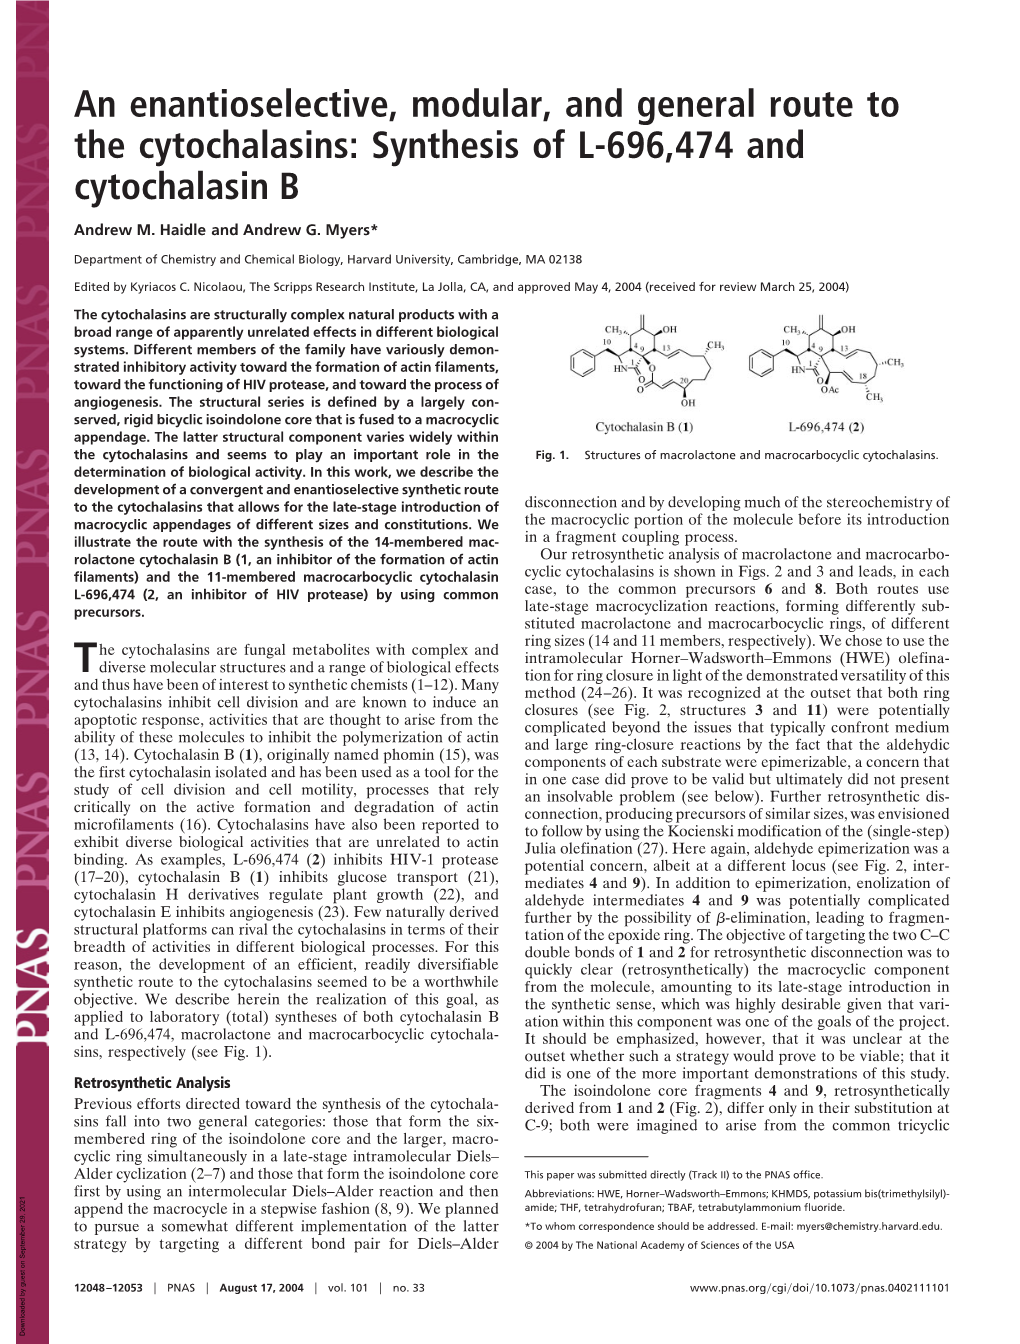 Synthesis of L-696474 and Cytochalasin B